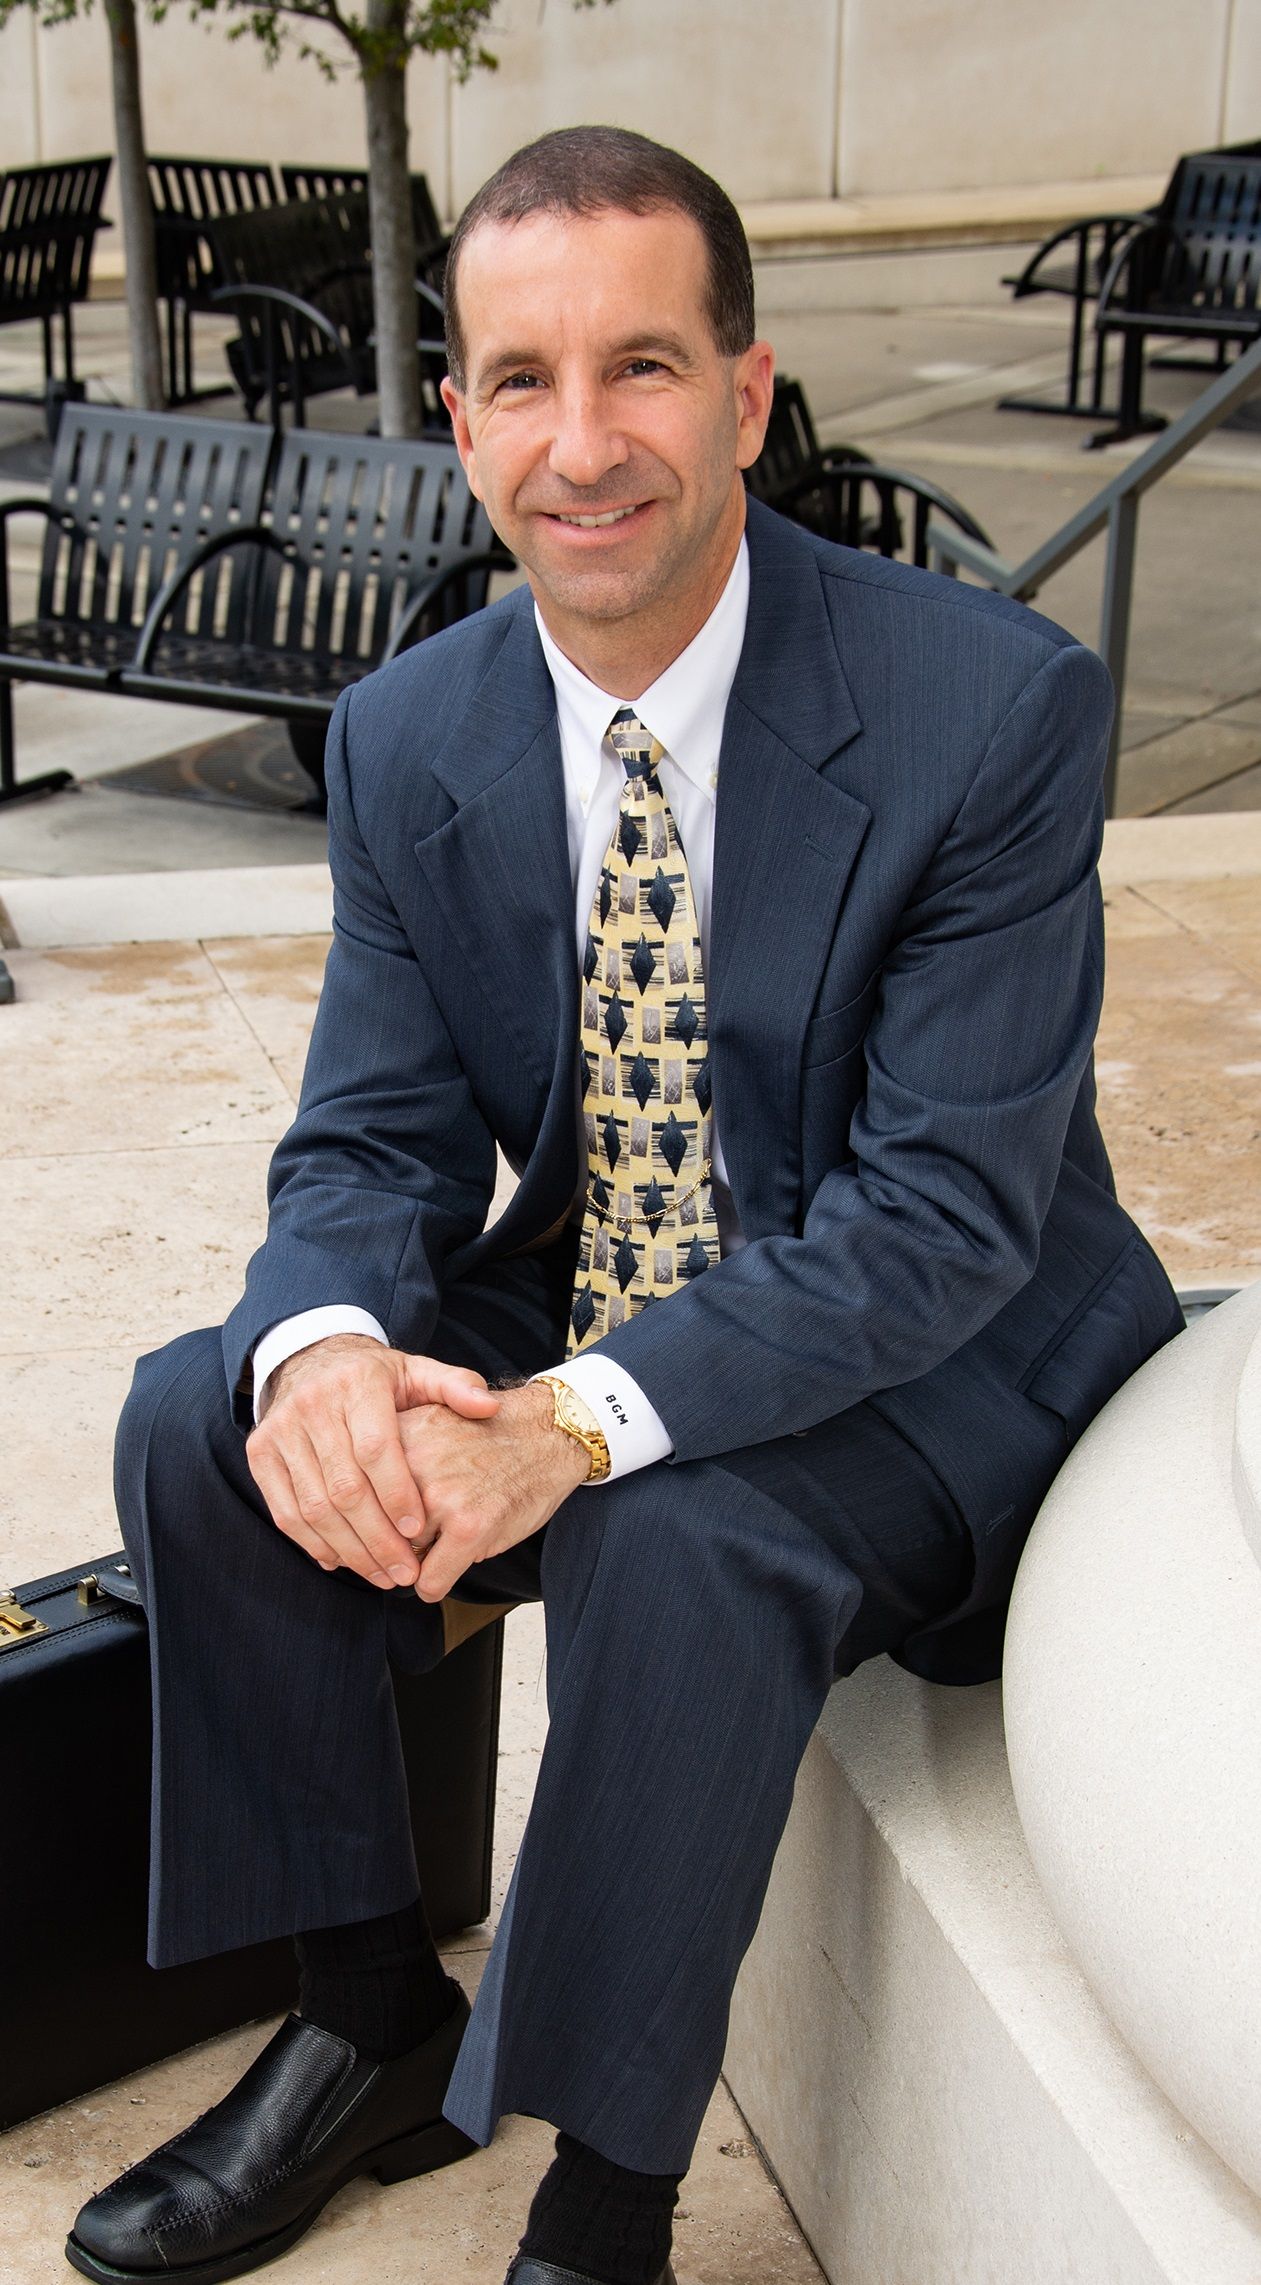 Christian Attorney Jacksonville Florida | Attorney Blane McCarthy sitting by a pillar at the Jacksonville courthouse